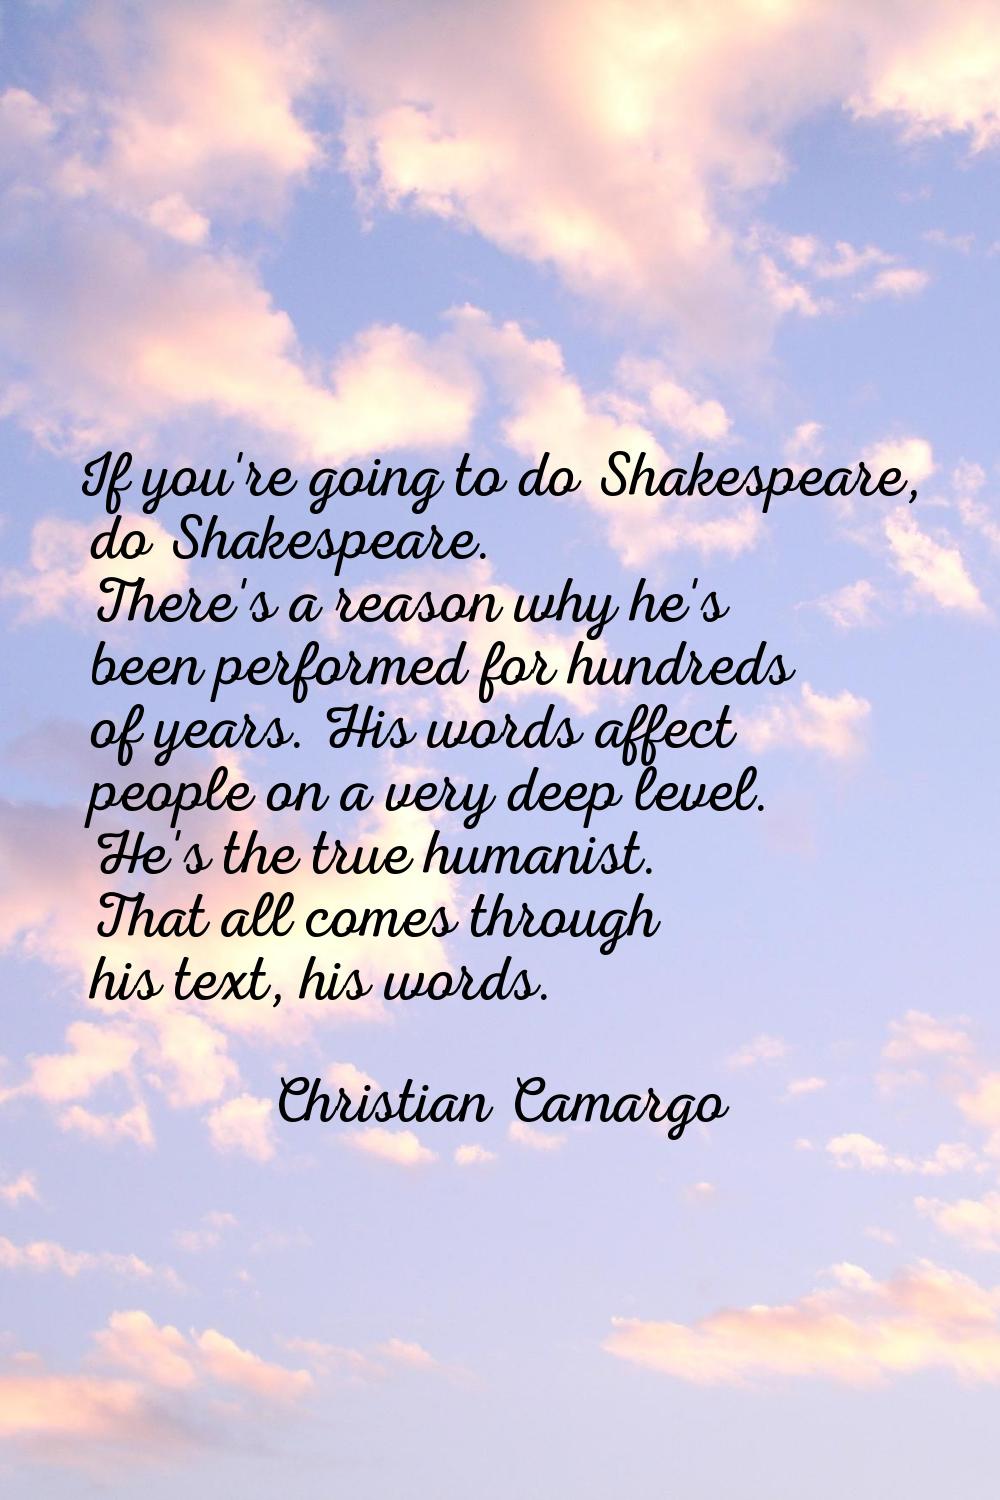 If you're going to do Shakespeare, do Shakespeare. There's a reason why he's been performed for hun